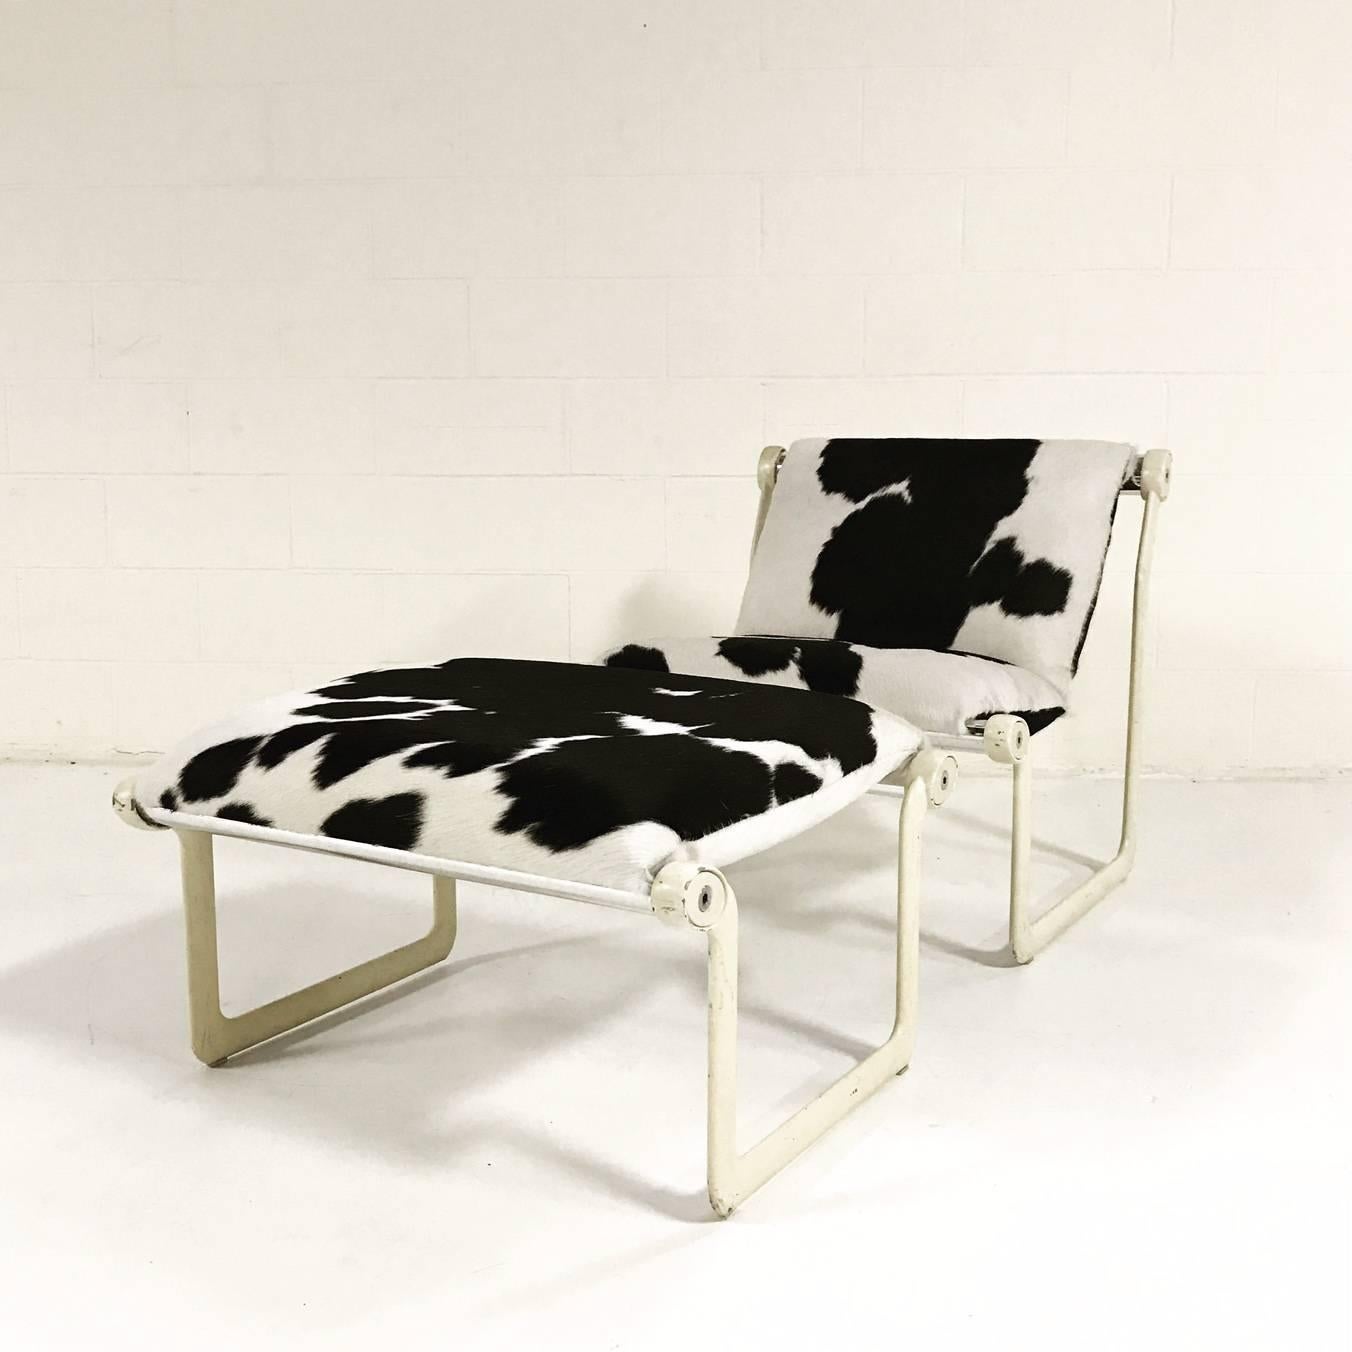 Another iconic MCM chair for the collection. Designed by Bruce Hannah and Andrew Morrison for Knoll in the 1970s, the swing chair and ottoman are highly sought after pieces. Newly upholstered in black and white Brazilian cowhide, it’s the perfect